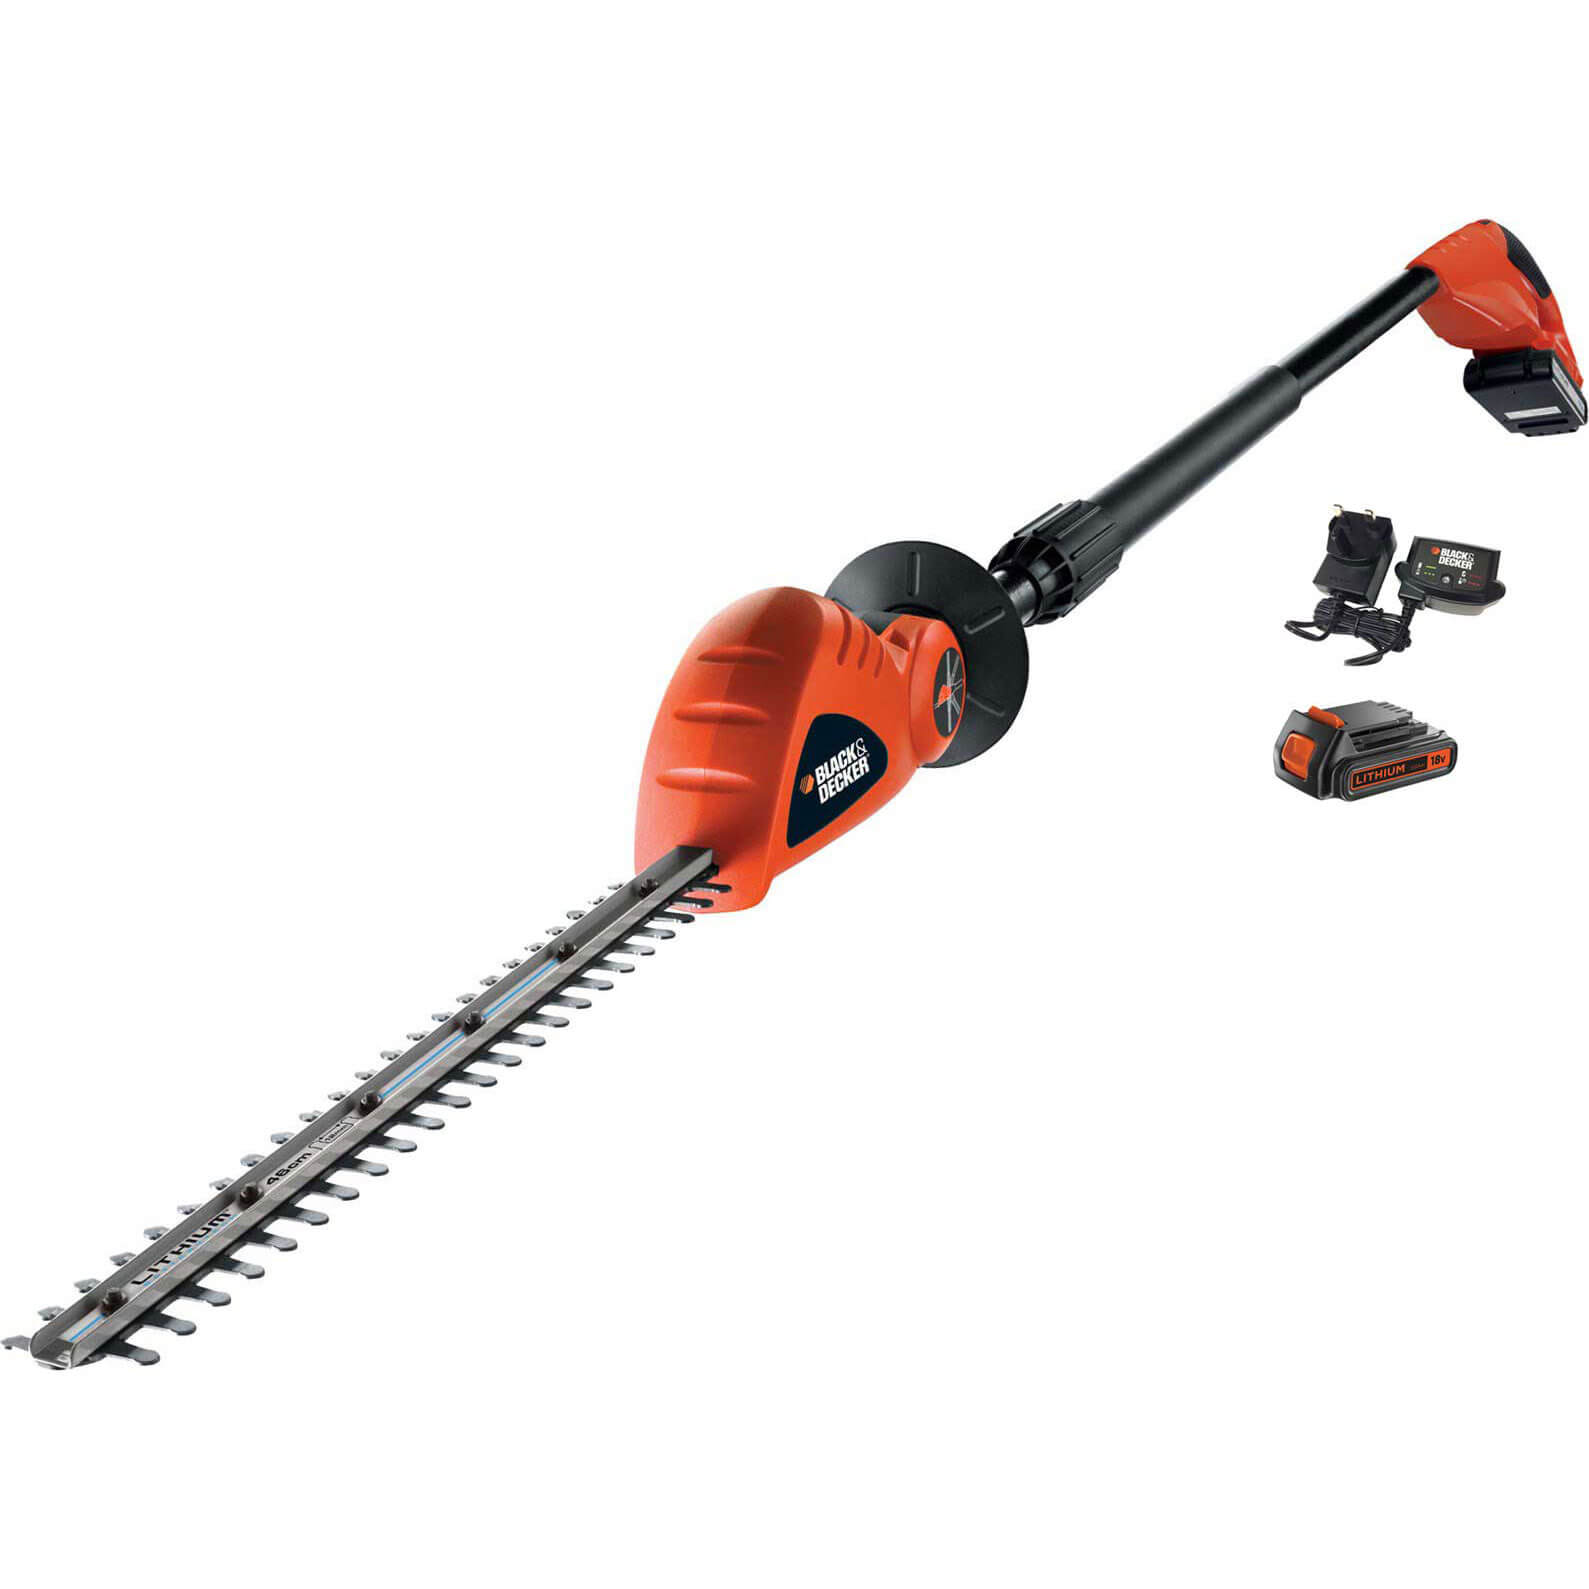 Image of Black and Decker GTC1843L 18v Cordless Long Articulating Hedge Trimmer 430mm 2 x 2ah Li-ion Charger